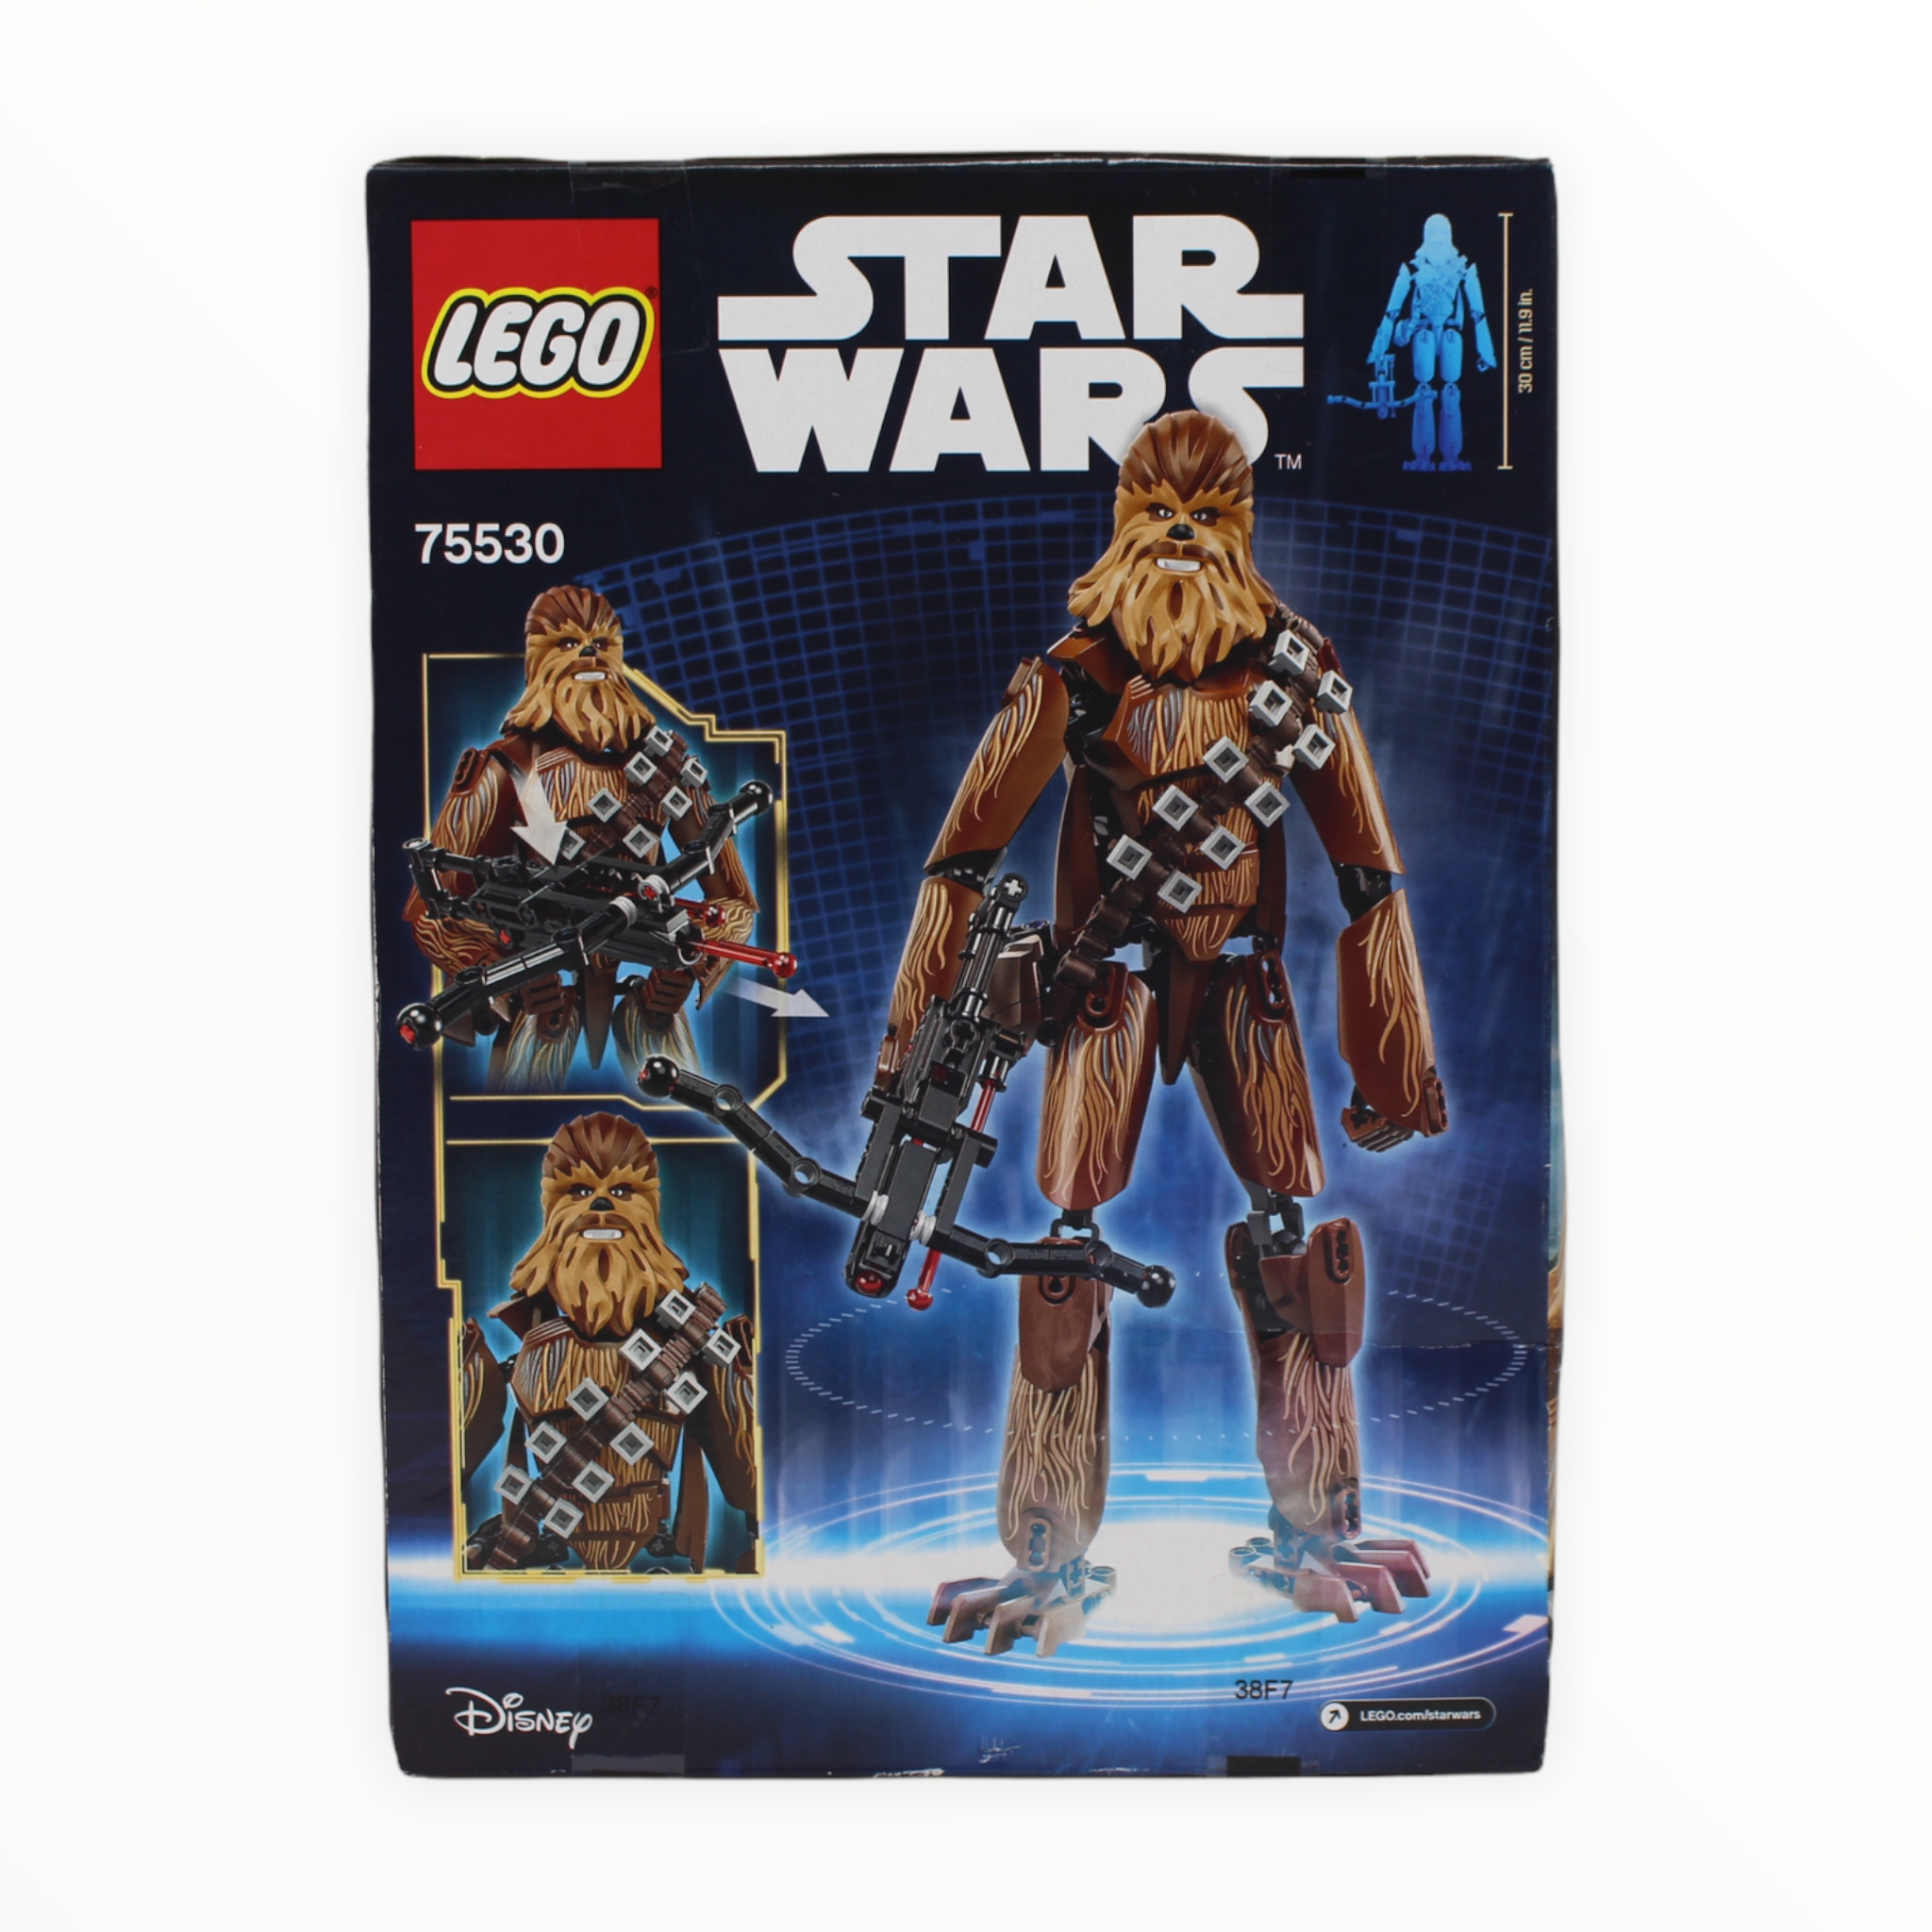 Retired Set 75530 Star Wars Buildable Figures Chewbacca